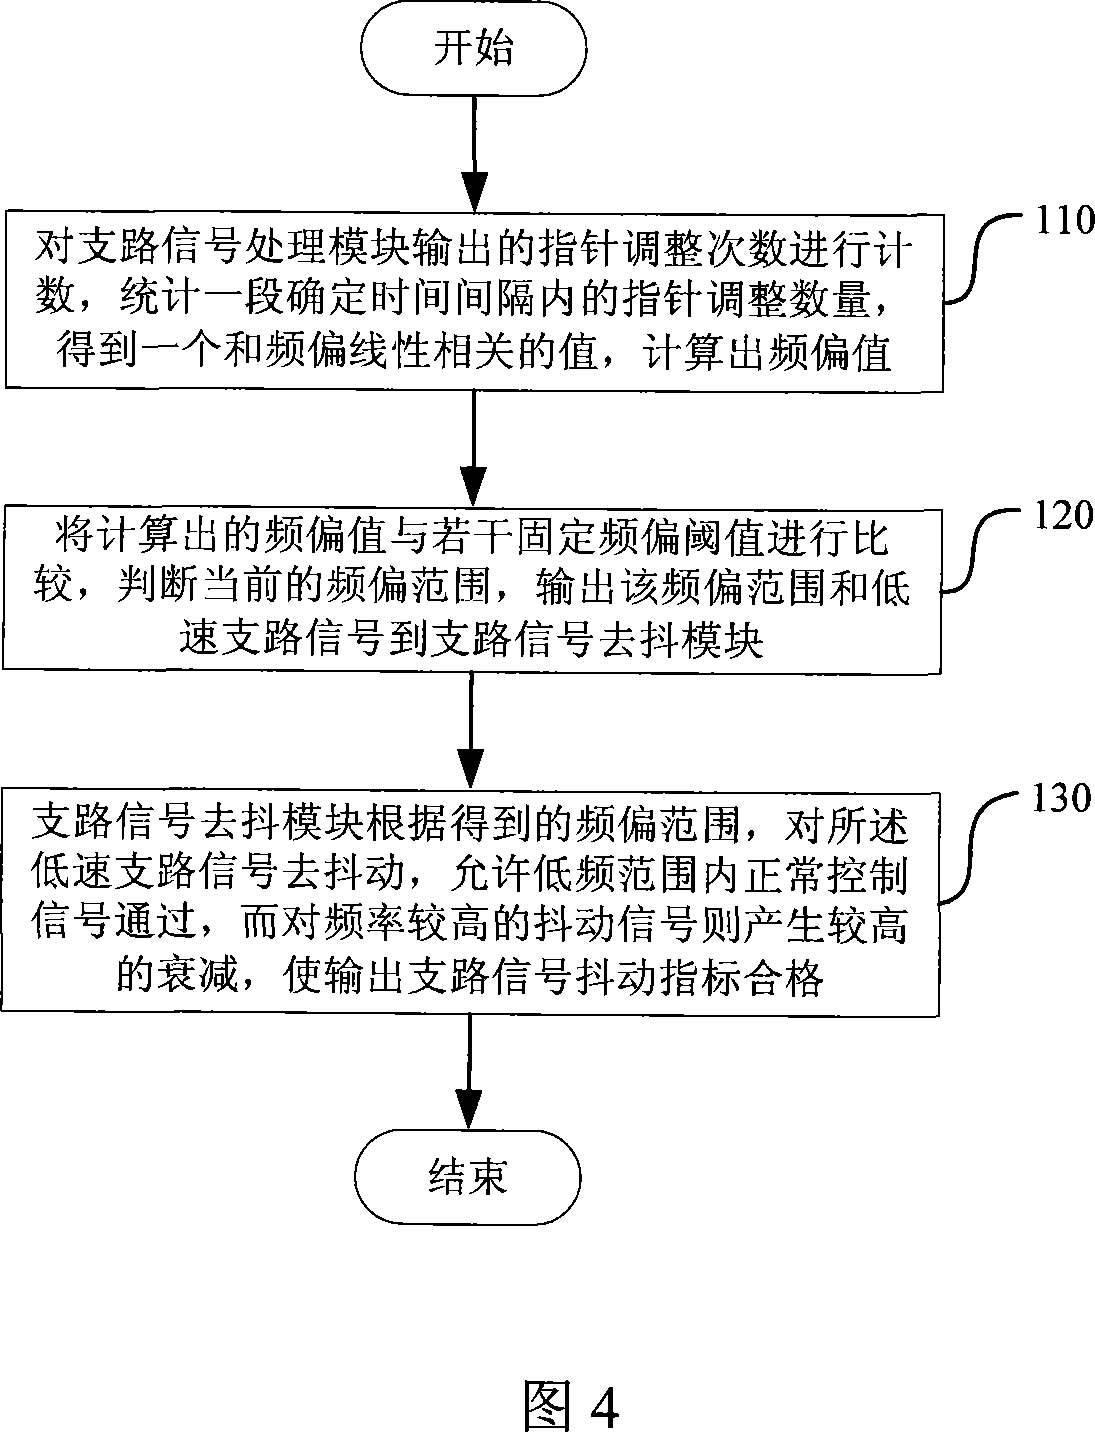 Method and system of reducing error code of service